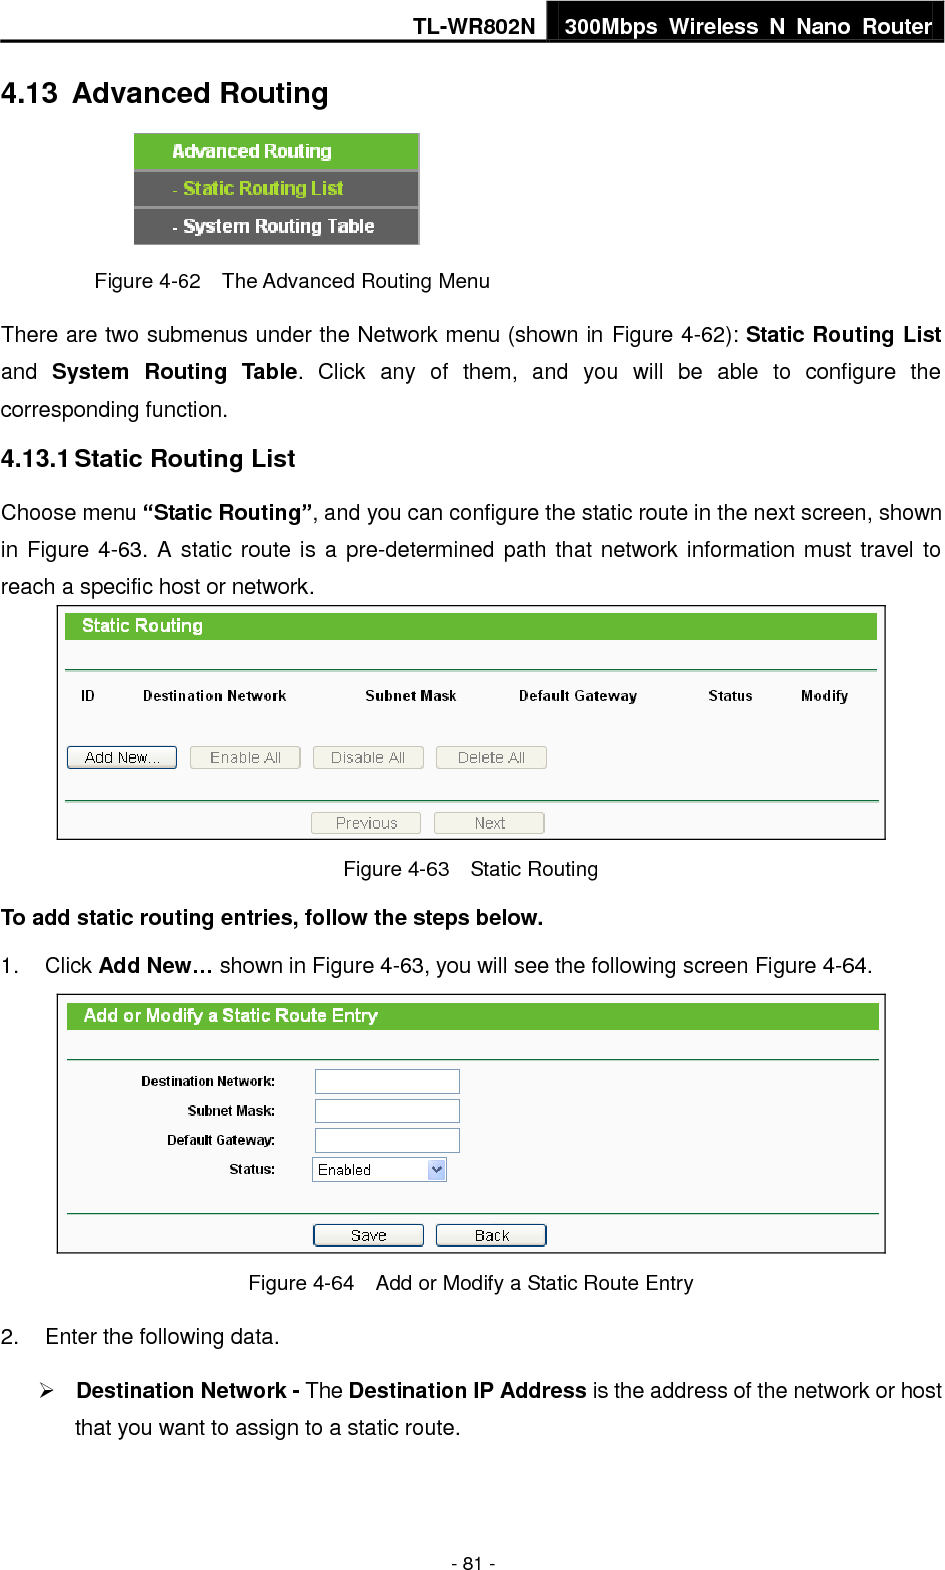 TL-WR802N 300Mbps  Wireless  N  Nano  Router  - 81 - 4.13  Advanced Routing  Figure 4-62  The Advanced Routing Menu There are two submenus under the Network menu (shown in Figure 4-62): Static Routing List and  System Routing  Table.  Click  any  of  them,  and  you  will  be  able  to  configure  the corresponding function. 4.13.1 Static Routing List Choose menu “Static Routing”, and you can configure the static route in the next screen, shown in Figure 4-63. A static route is a pre-determined path that network information must travel to reach a specific host or network.  Figure 4-63  Static Routing To add static routing entries, follow the steps below. 1.  Click Add New… shown in Figure 4-63, you will see the following screen Figure 4-64.    Figure 4-64  Add or Modify a Static Route Entry 2.  Enter the following data.  Destination Network - The Destination IP Address is the address of the network or host that you want to assign to a static route. 